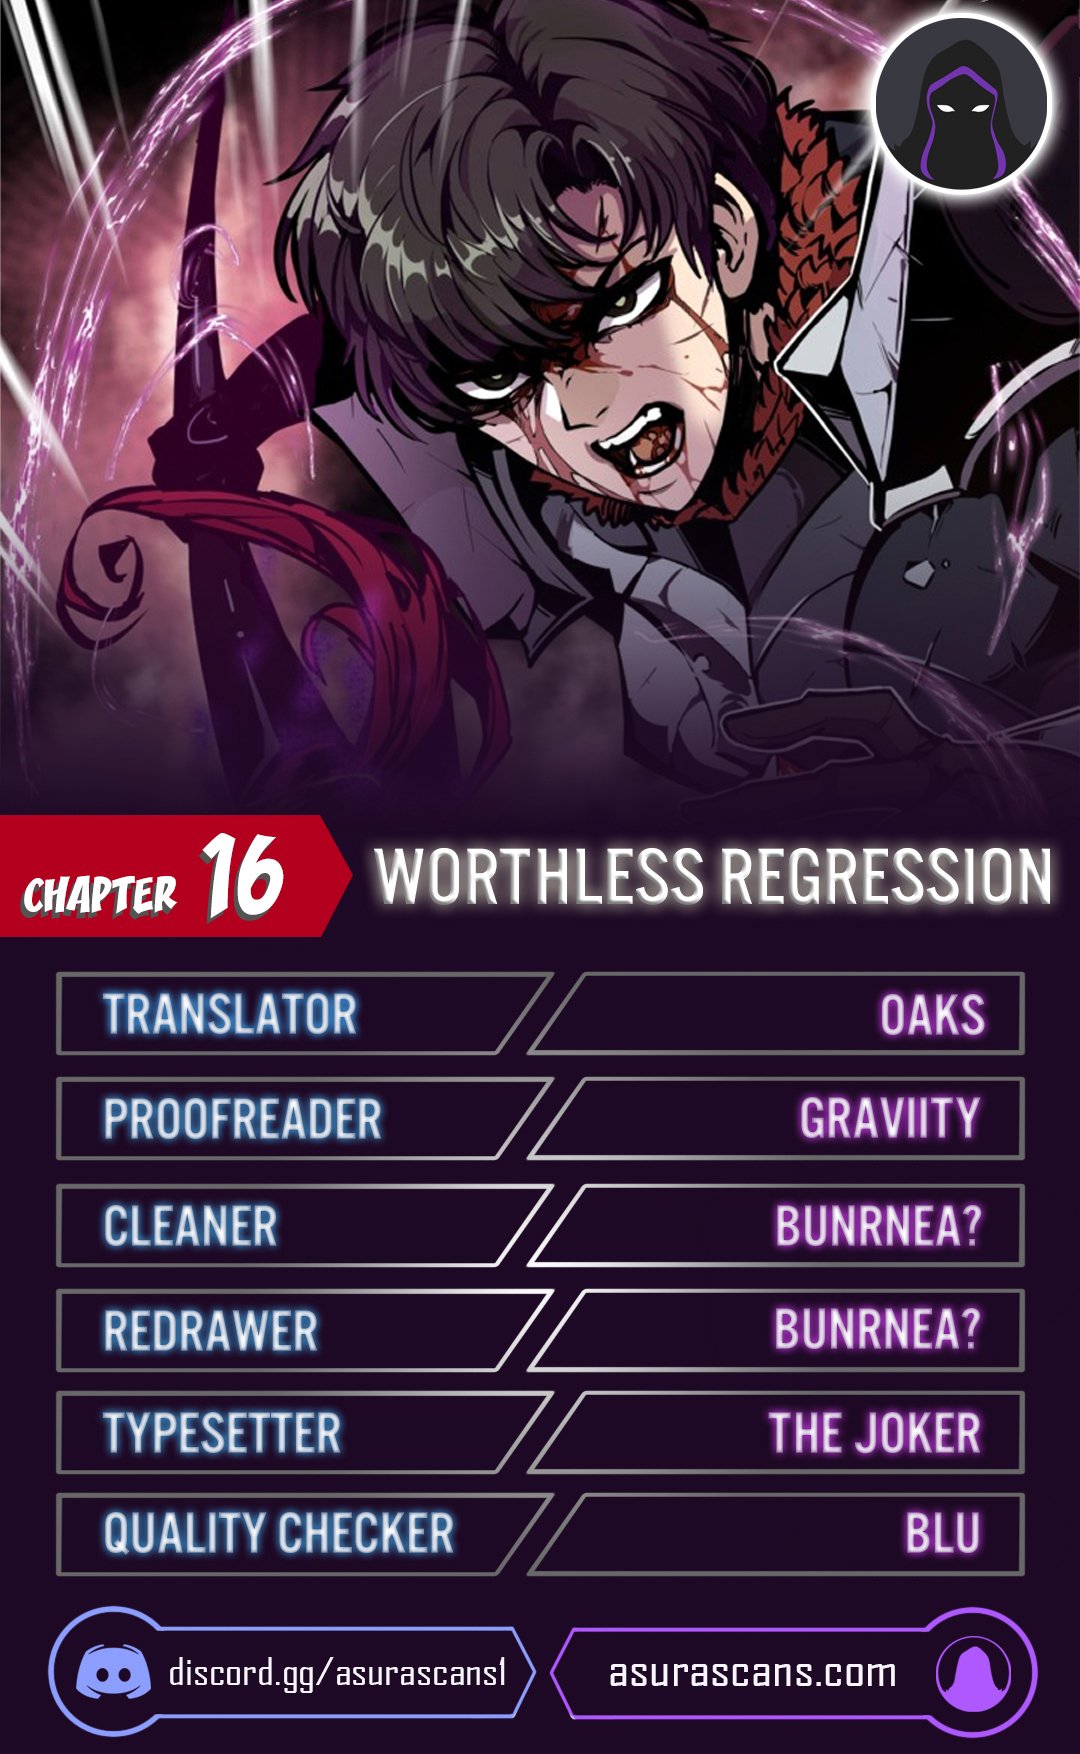 Worthless Regression - Chapter 20454 - Image 1